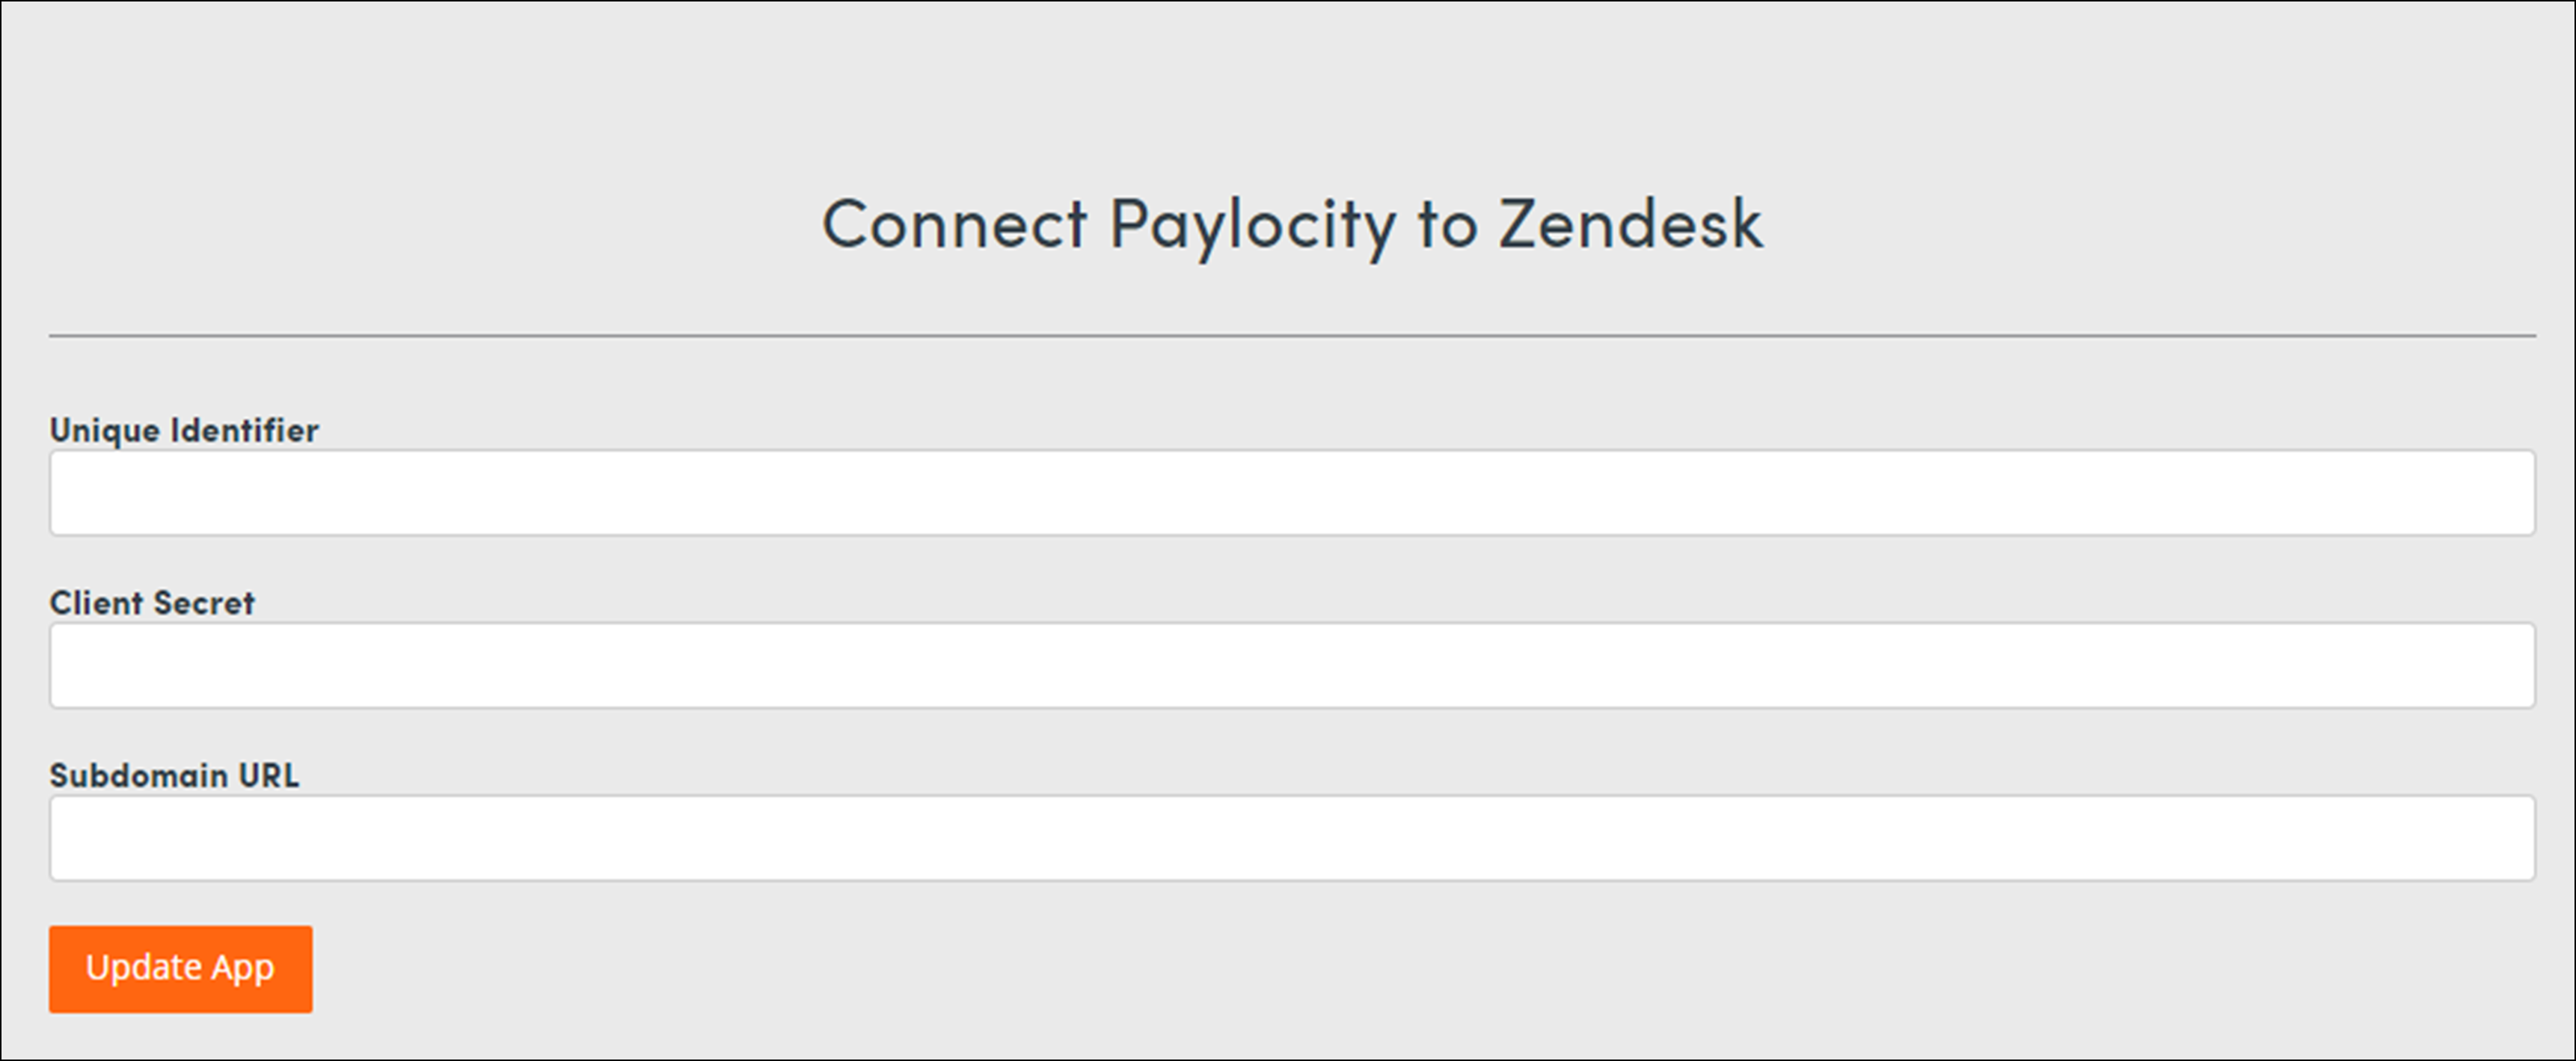 connectpctytozendesk.png